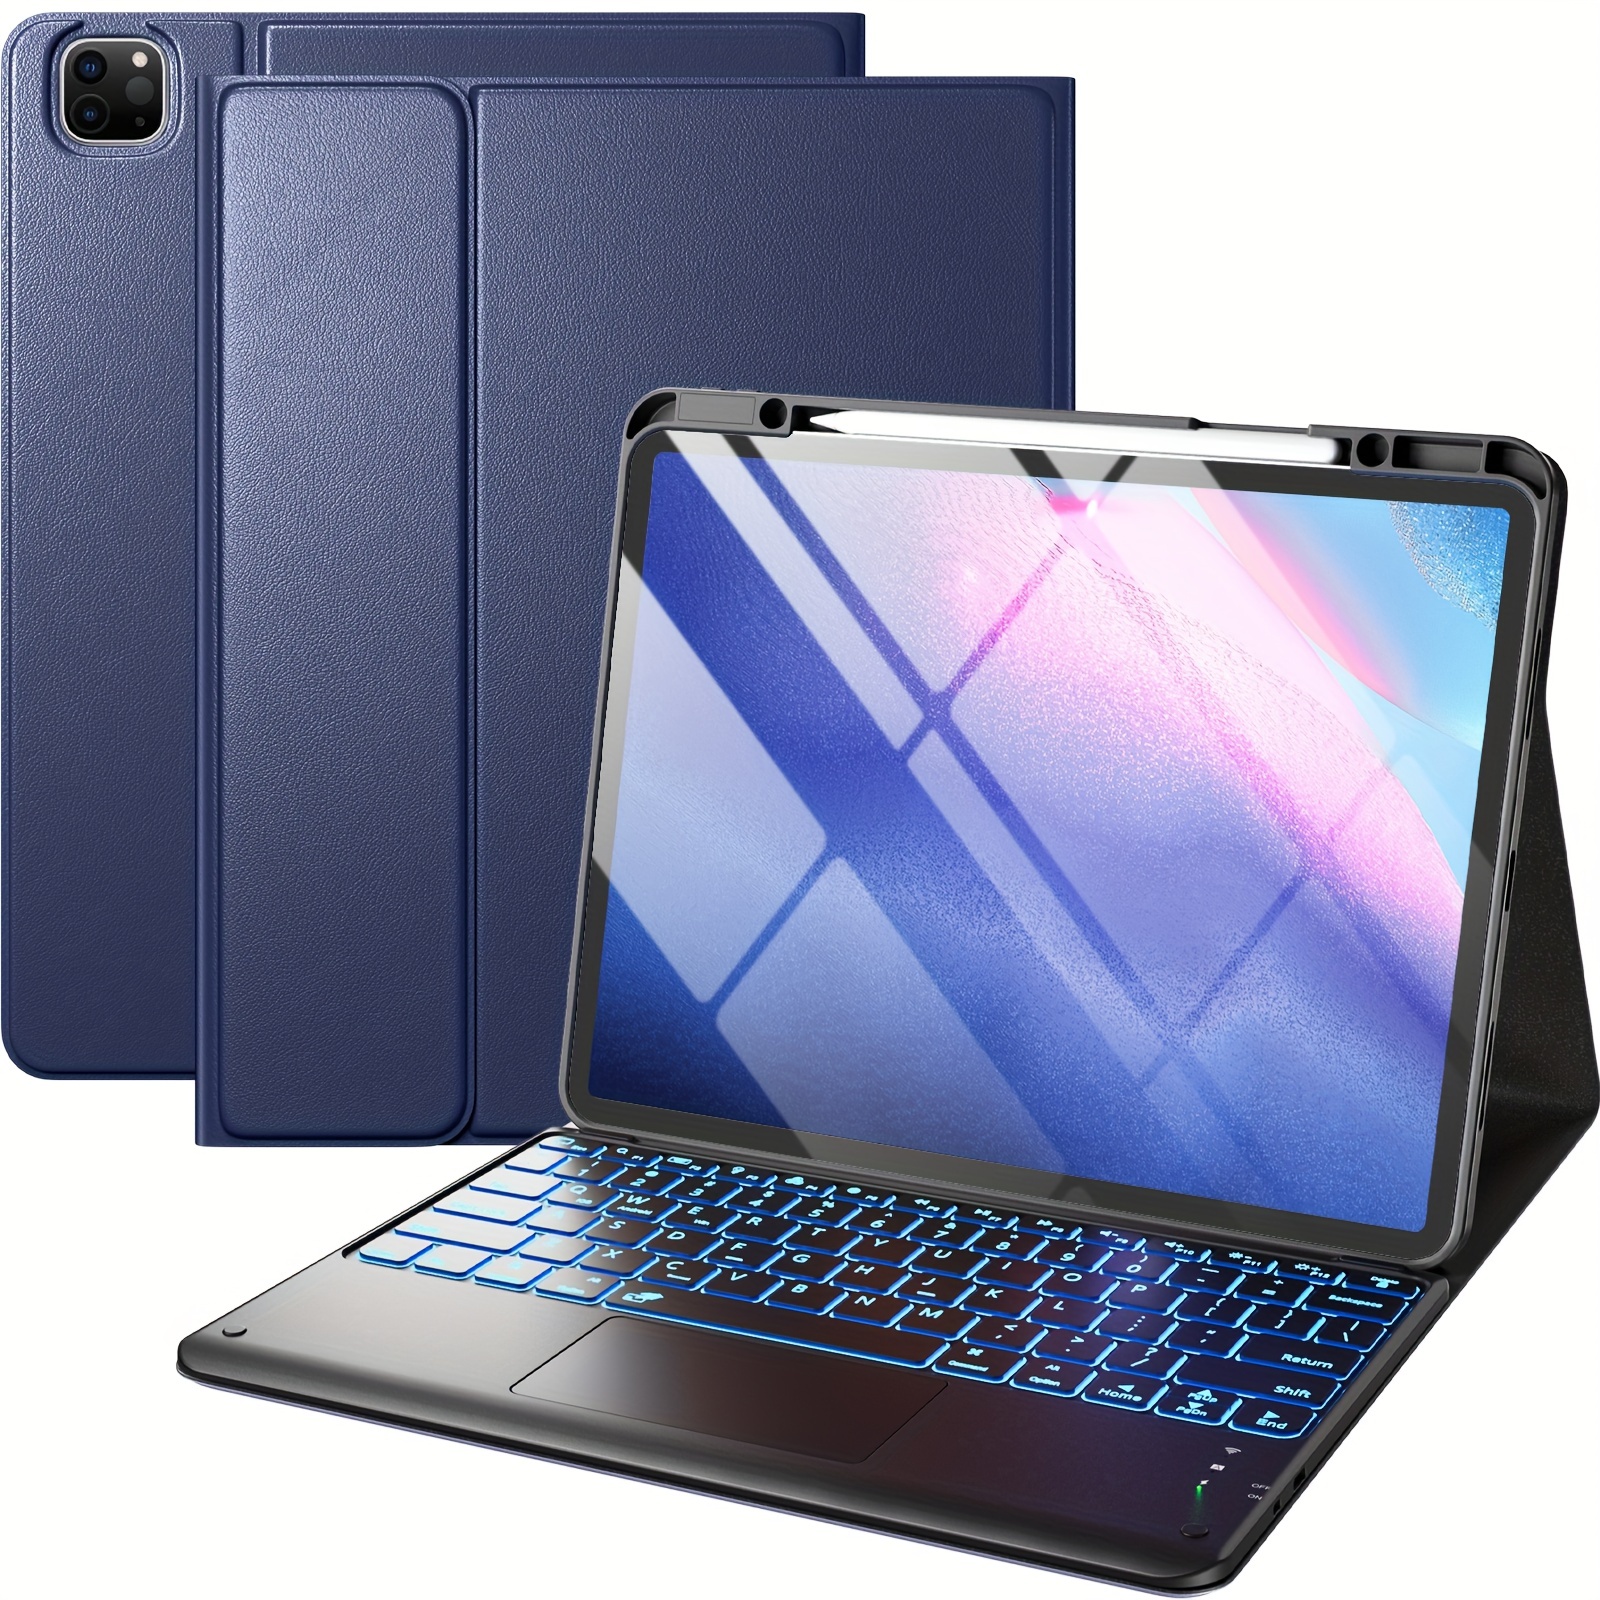 Keyboard Case With Keyboard, Trackpad 7 Color Backlit Accessories Pencil Holder For IPad Pro 12.9 Case For IPad 12.9 Pro Case For 32.77 Cm 6th Generation 5th 4th 3rd Gen, IPad Pro 12.9, Blue